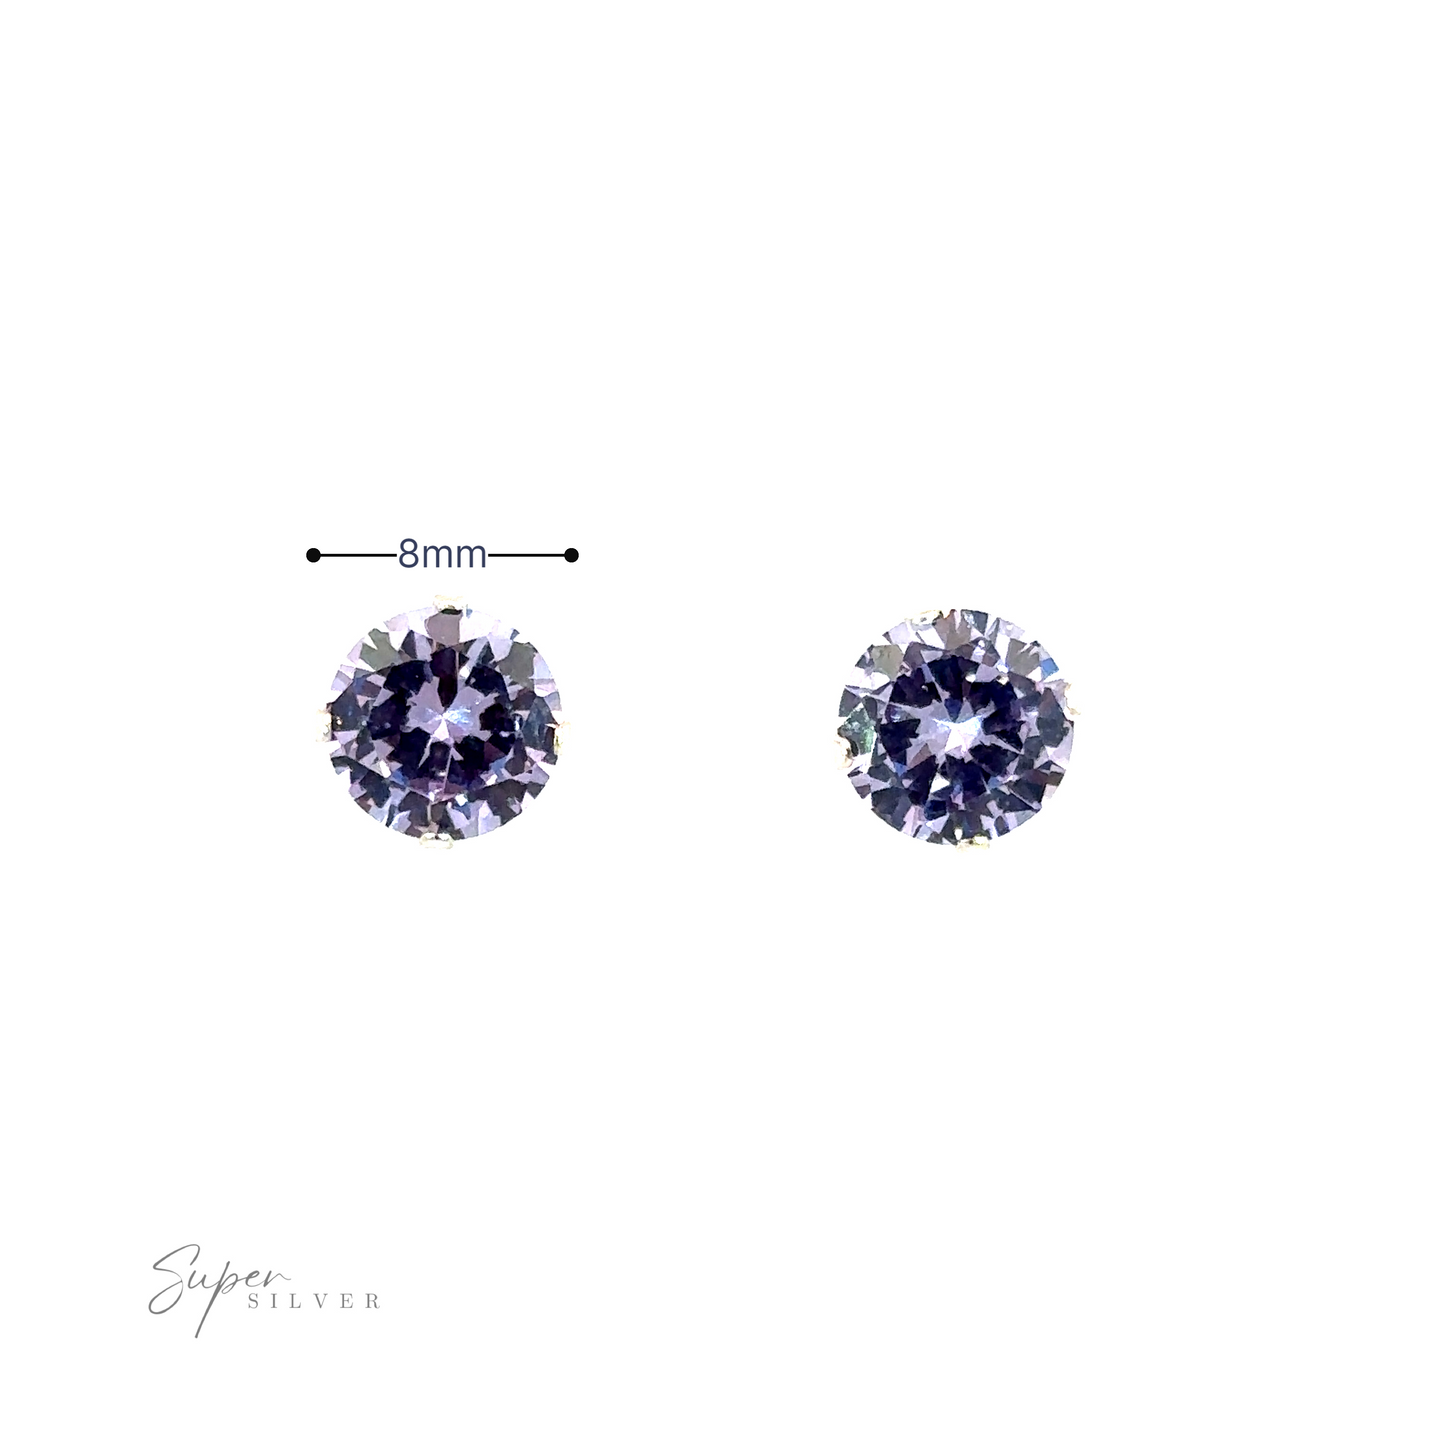 
                  
                    Two Round CZ Studs with an 8mm measurement indicator and "super silver" branding.
                  
                